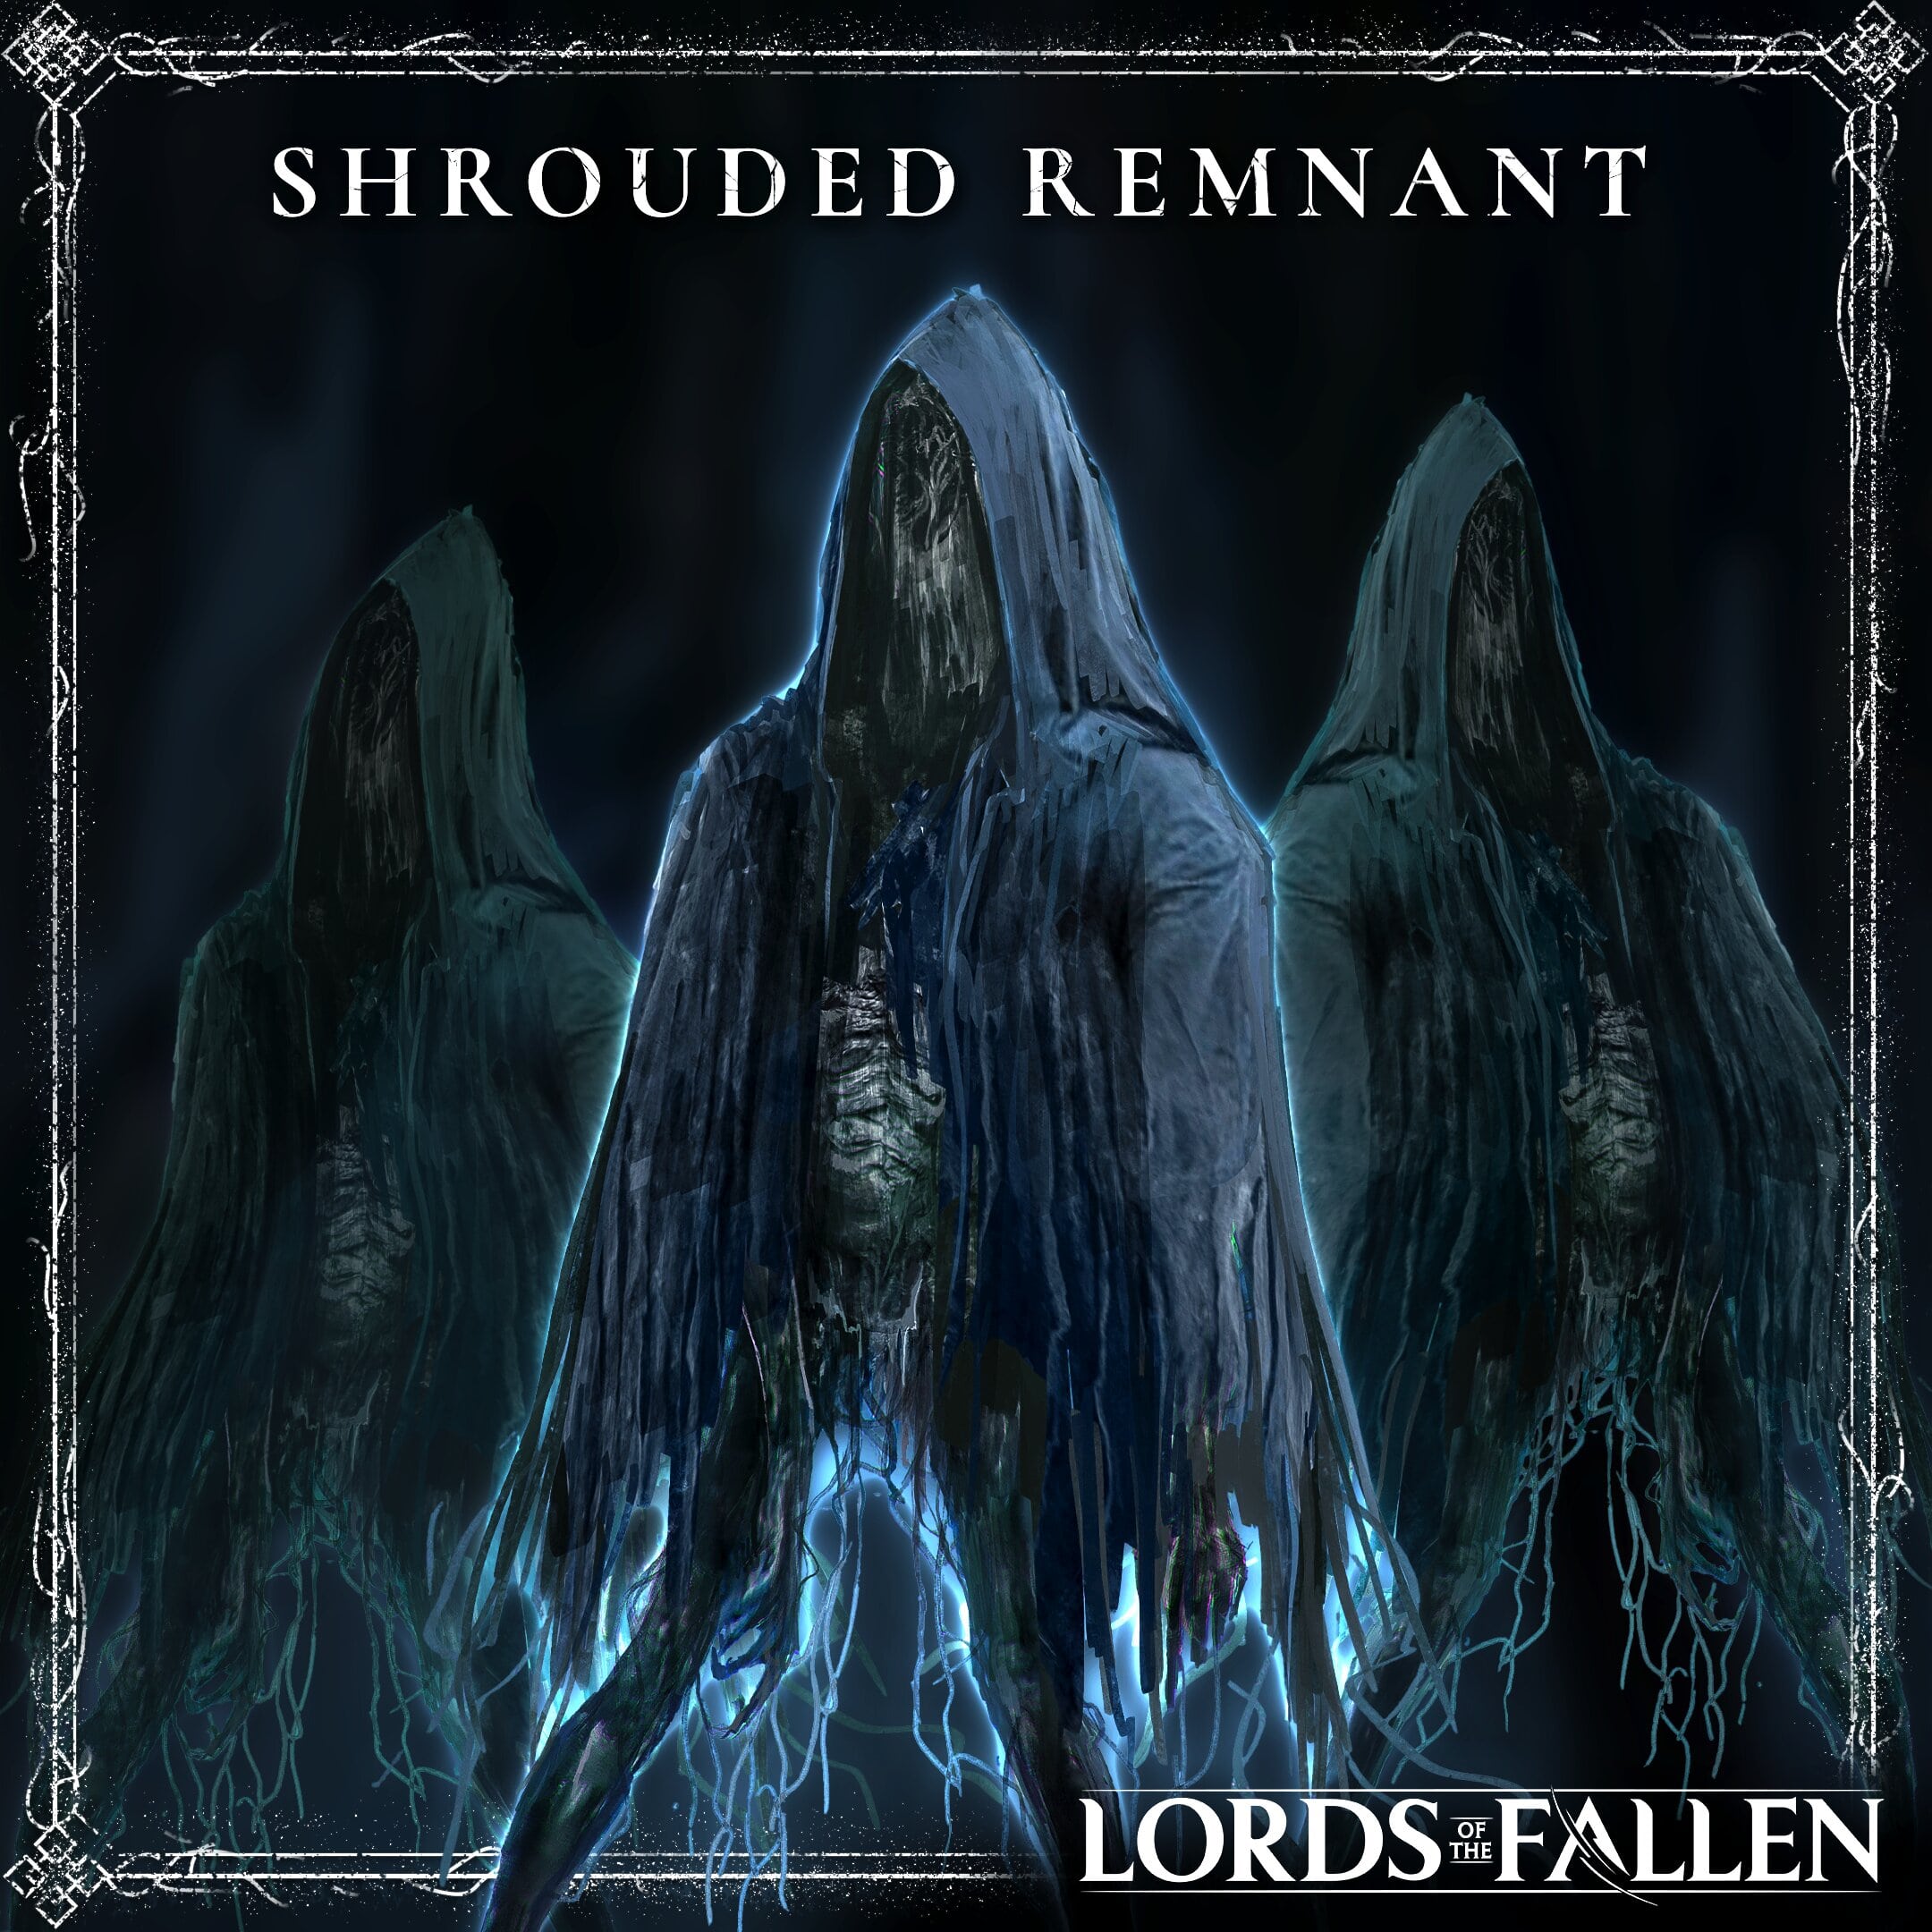 lords of the fallen shrouded remnant